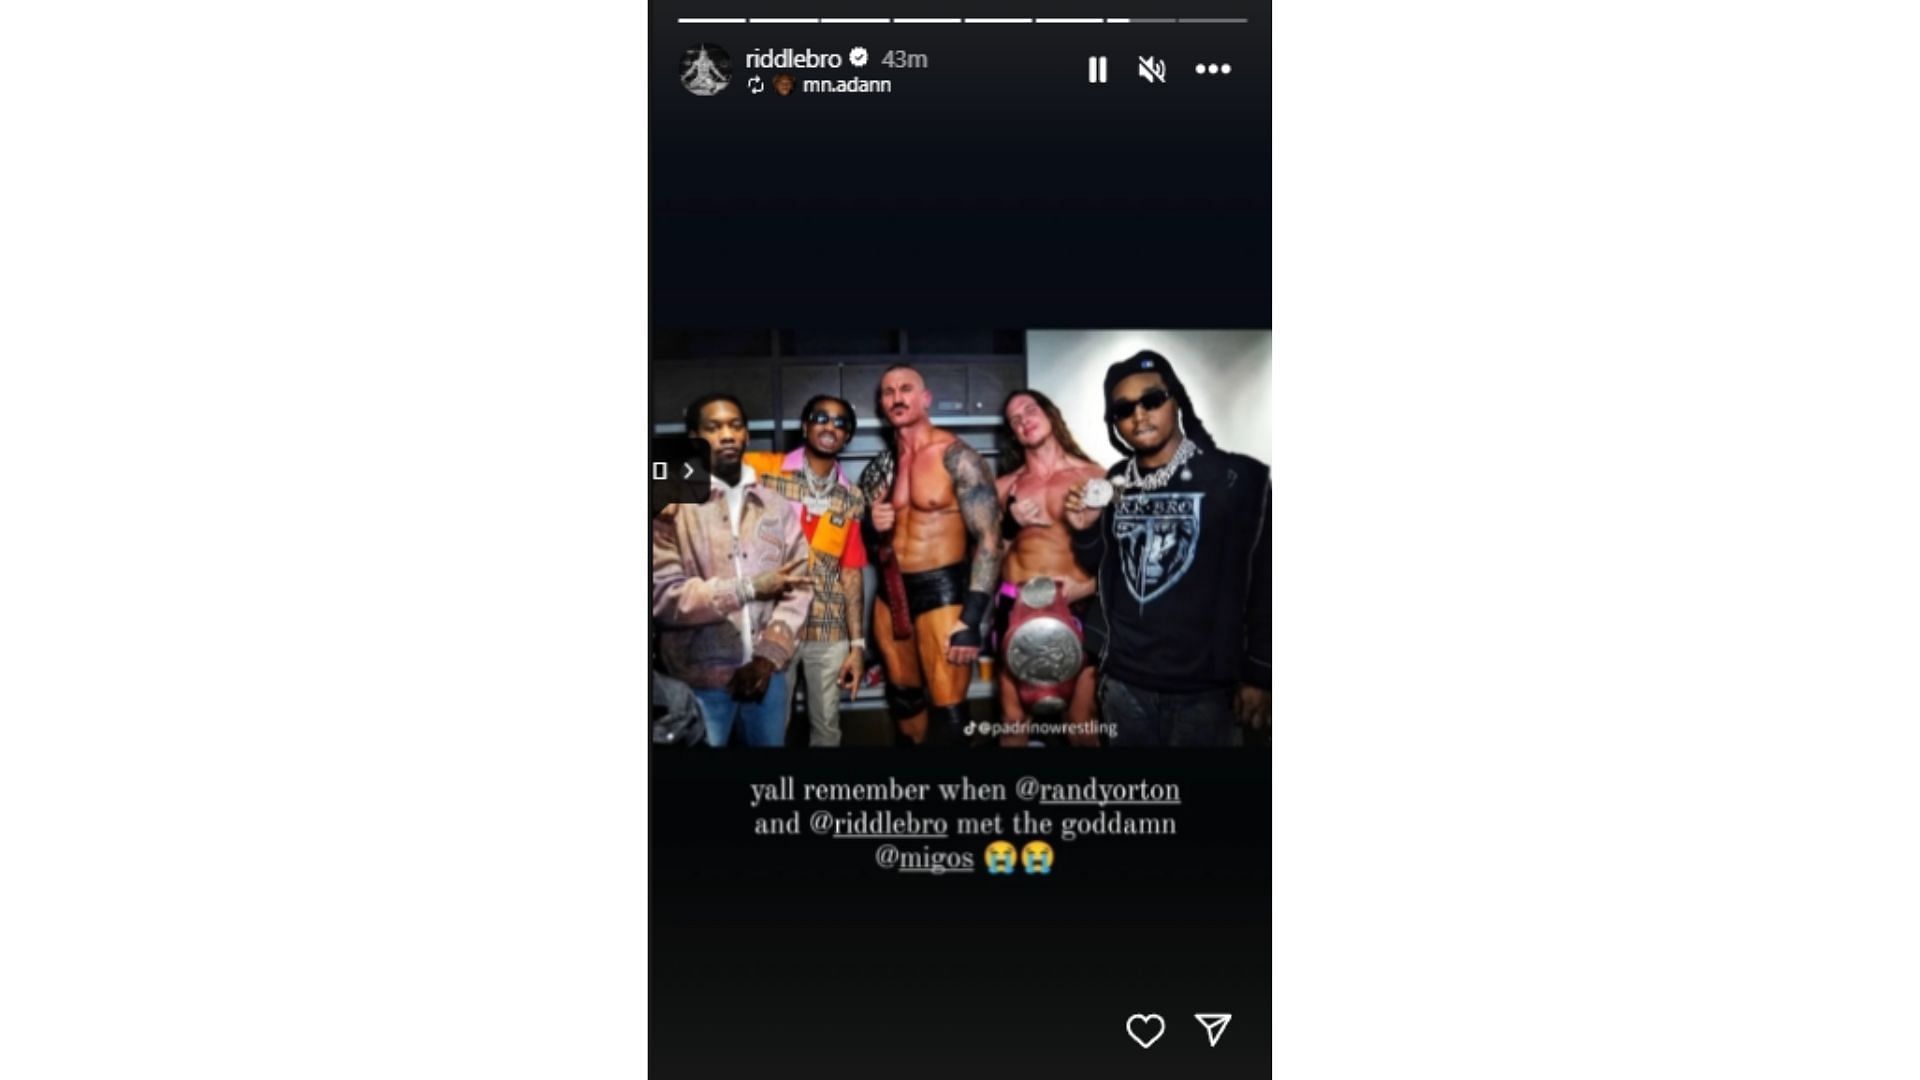 Matt Riddle recently shared a photograph on his Instagram handle